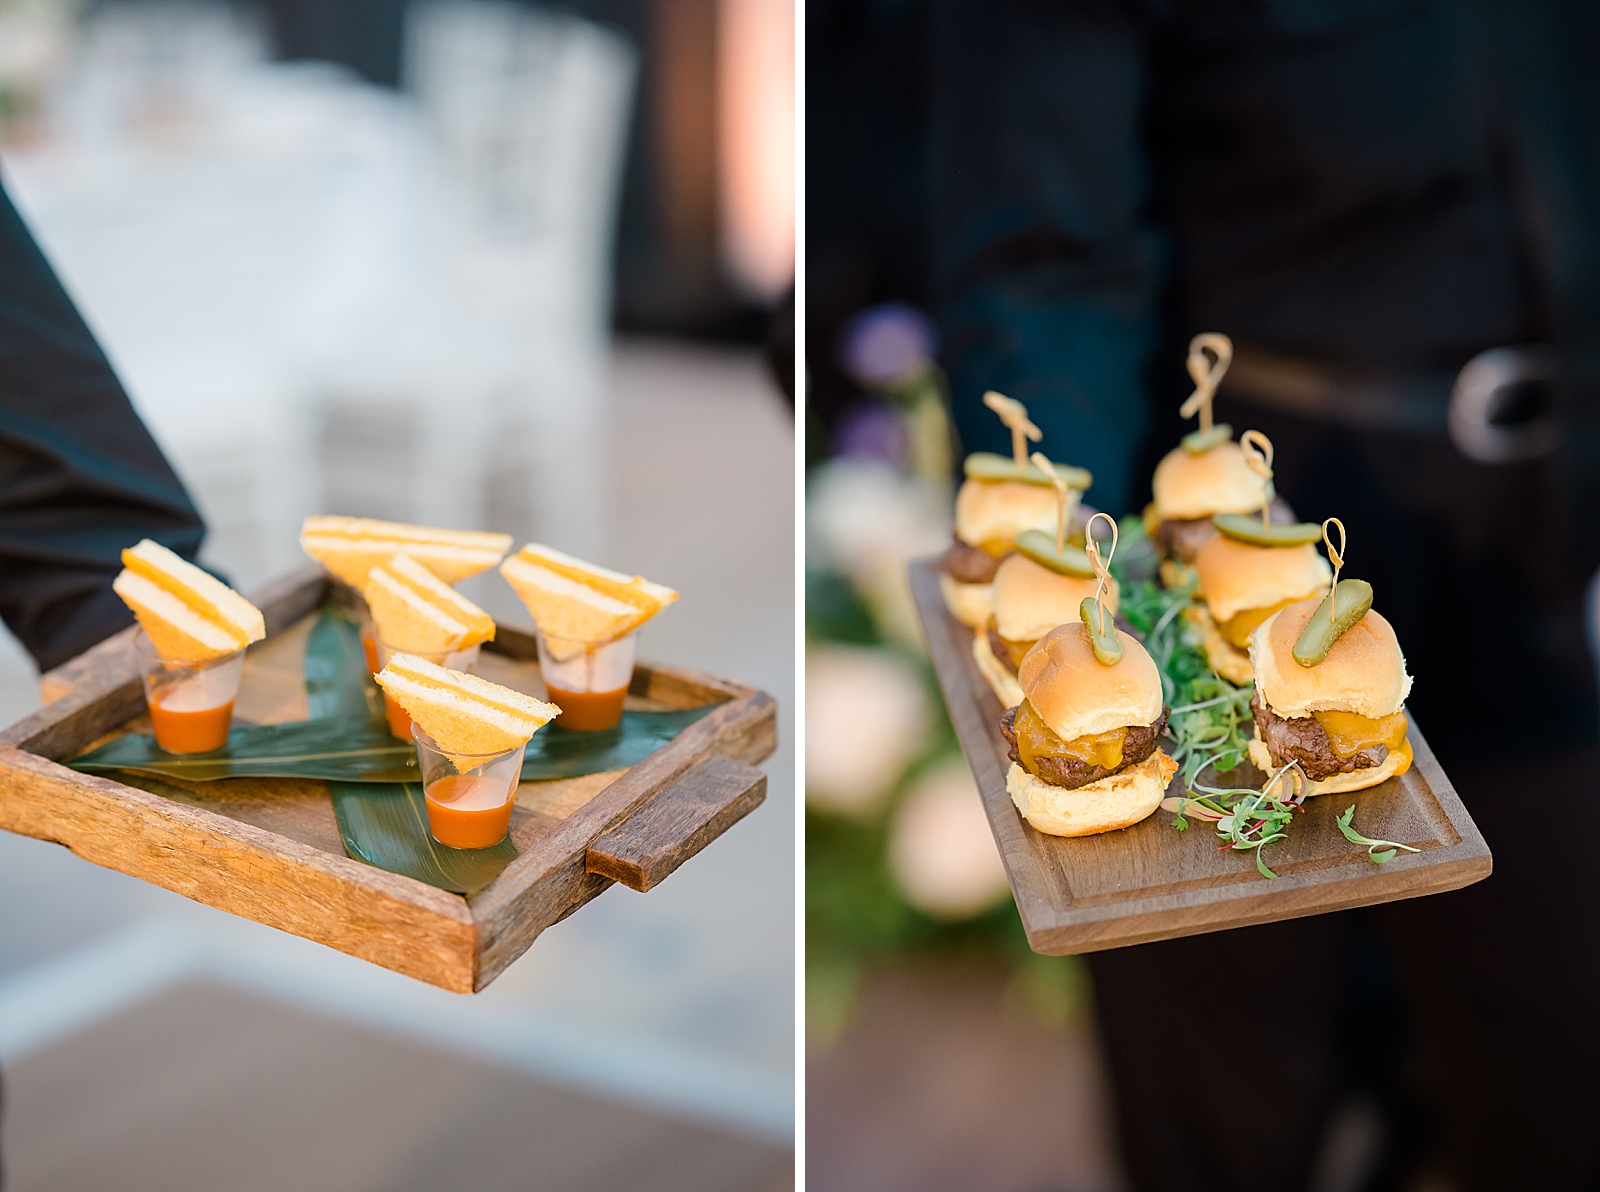 Left photo: Shot of grilled cheese and tomato soup hors d'oeuvres being served on a tray.
Right photo: Shot of cheeseburger sliders being served on a tray. 